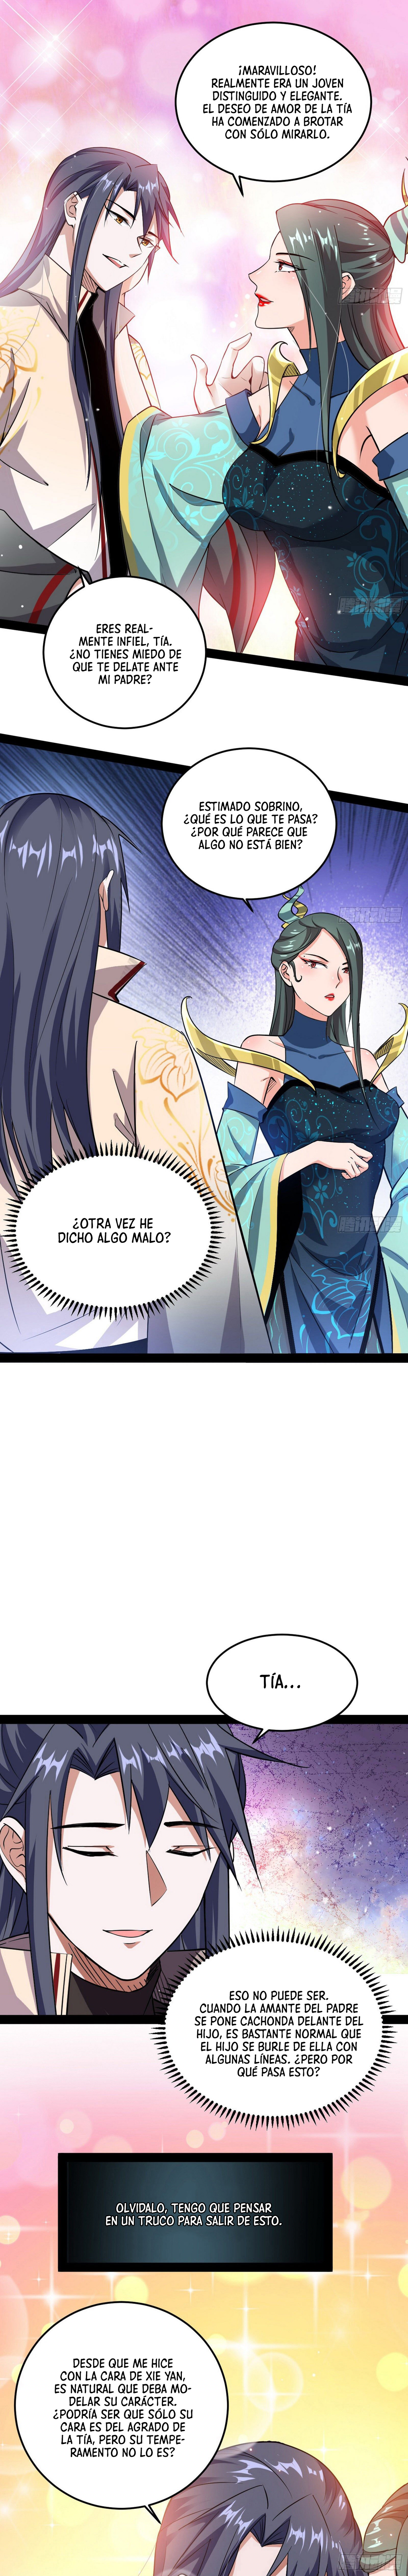 Manga Soy un dios maligno Chapter 93 image number 7